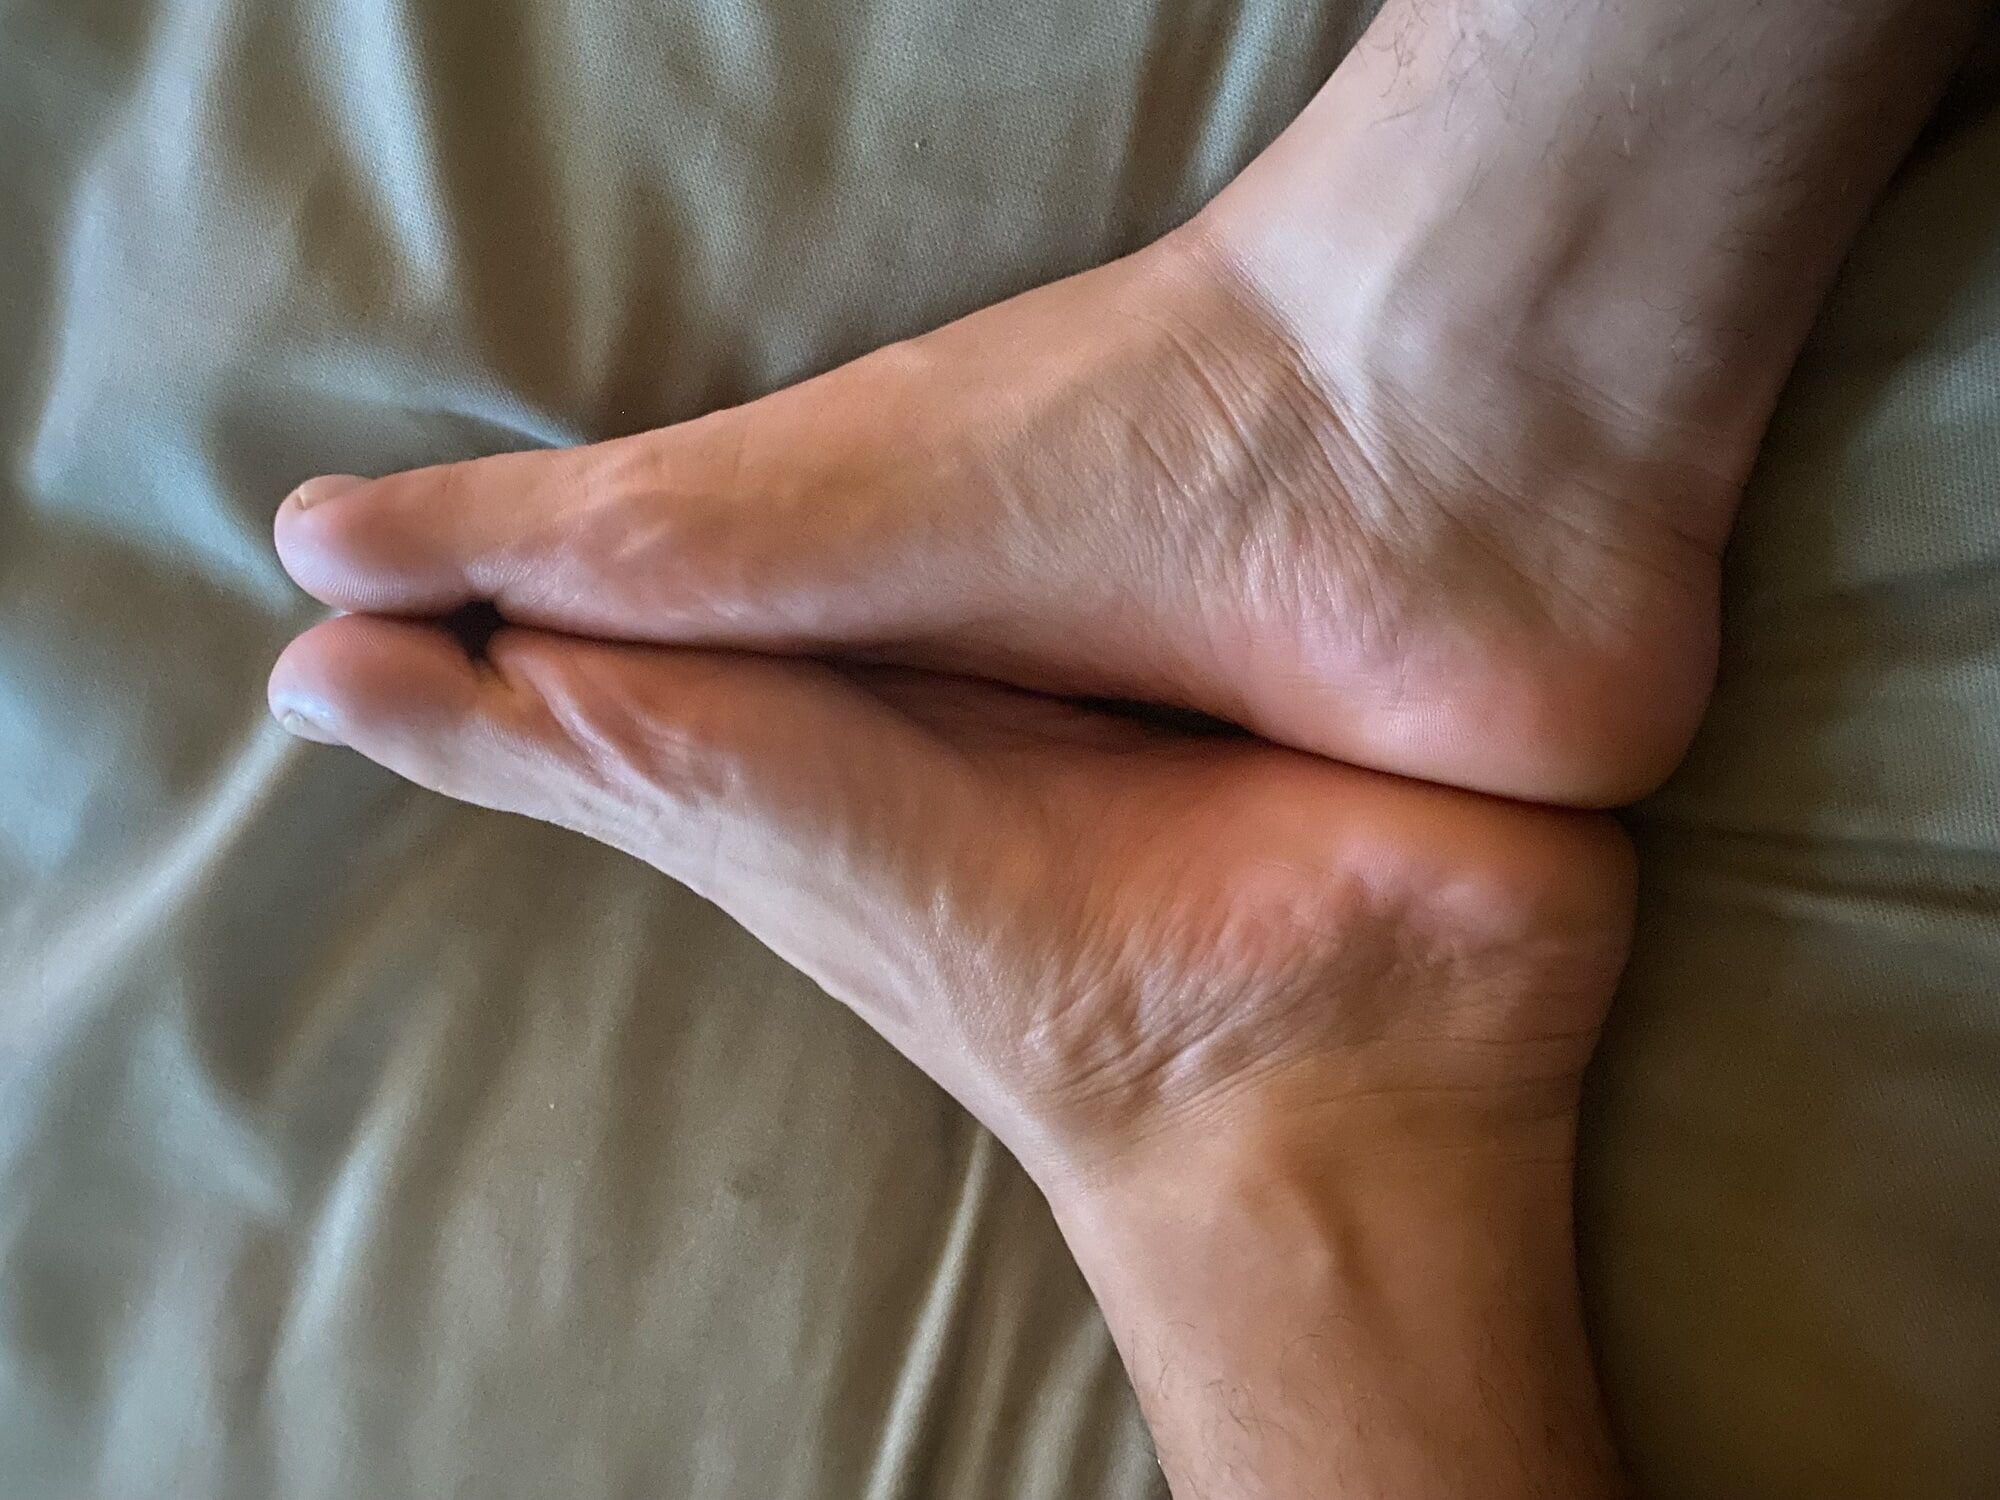 My feet for you #5